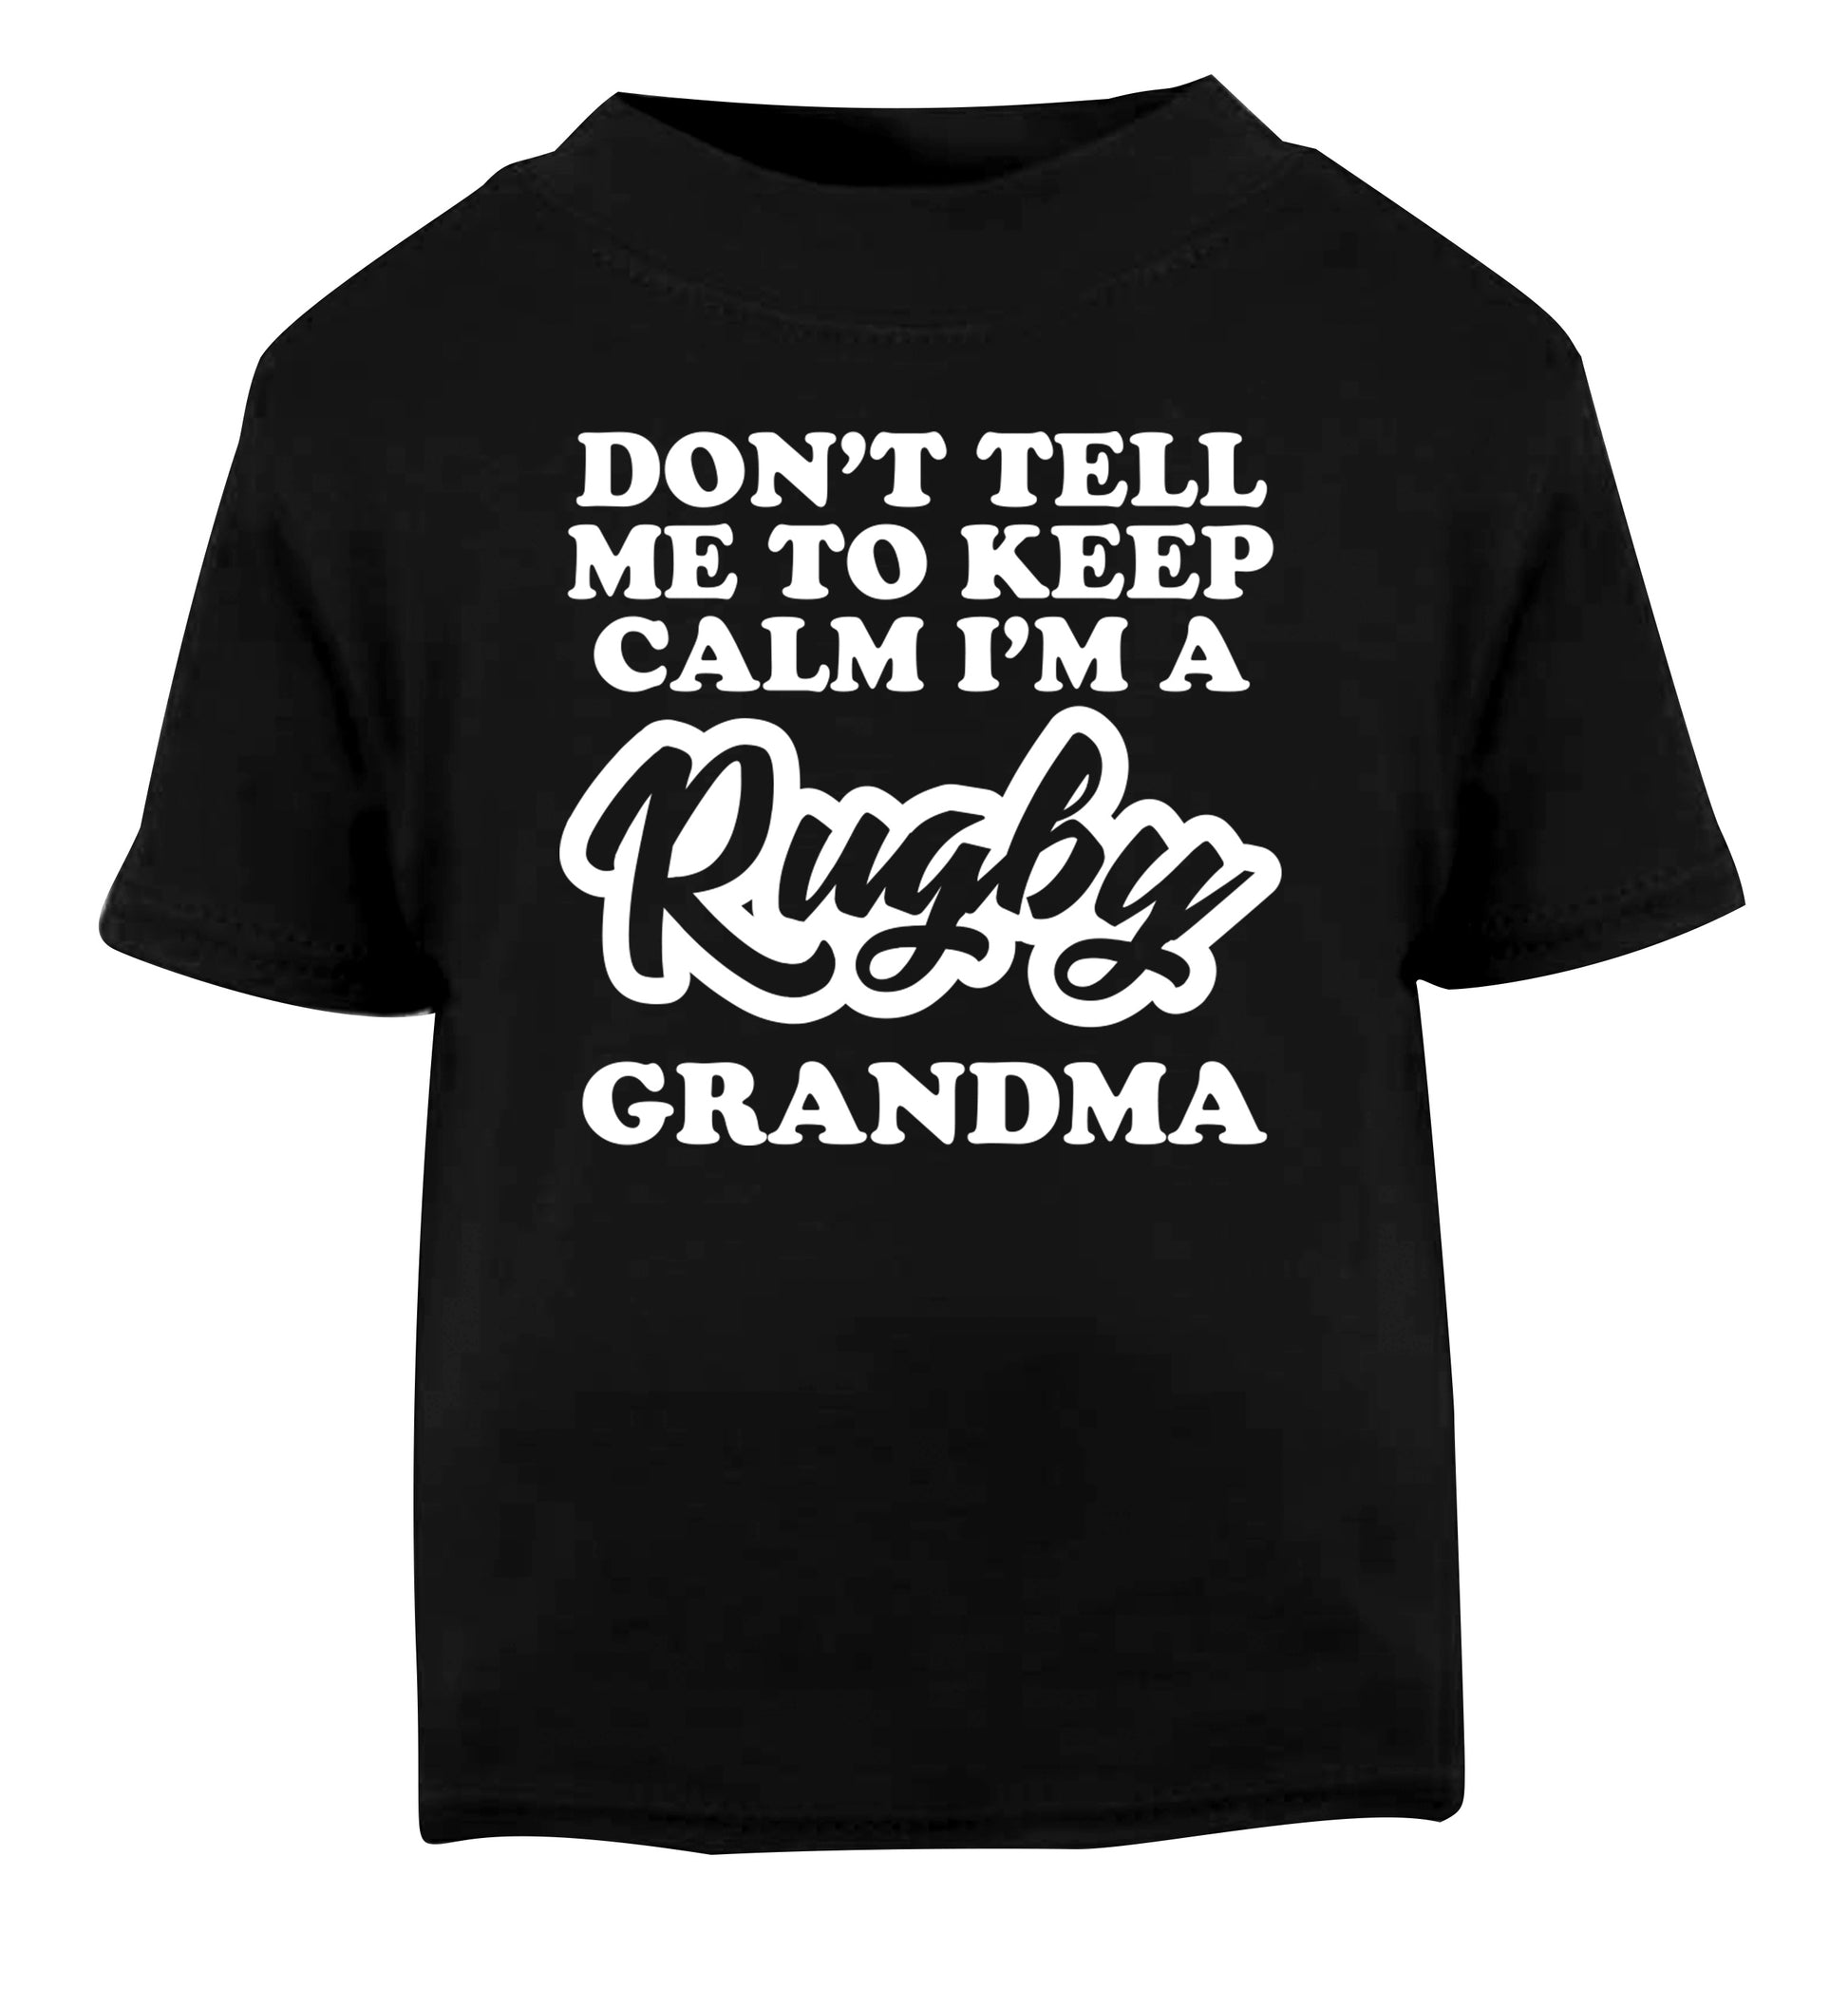 Don't tell me to keep calm I'm a rugby grandma Black Baby Toddler Tshirt 2 years